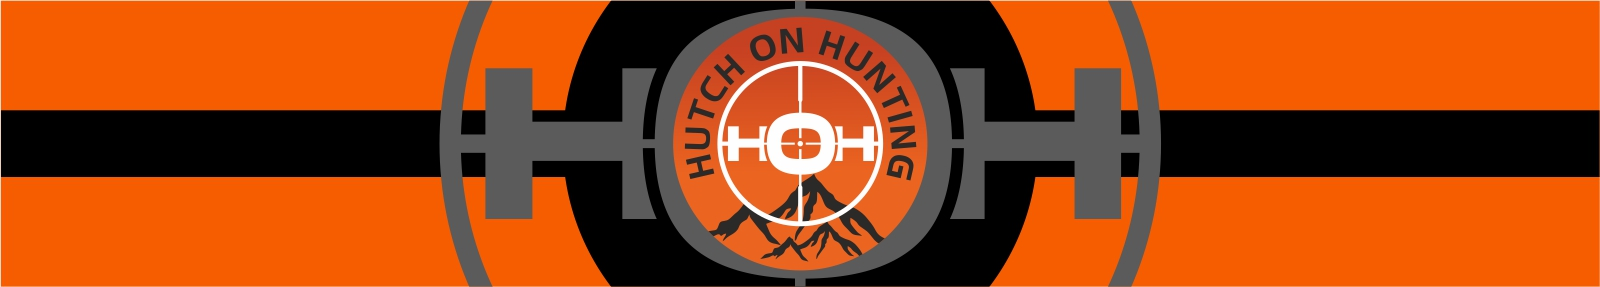 Hunt Colorado with Hutch On Hunting